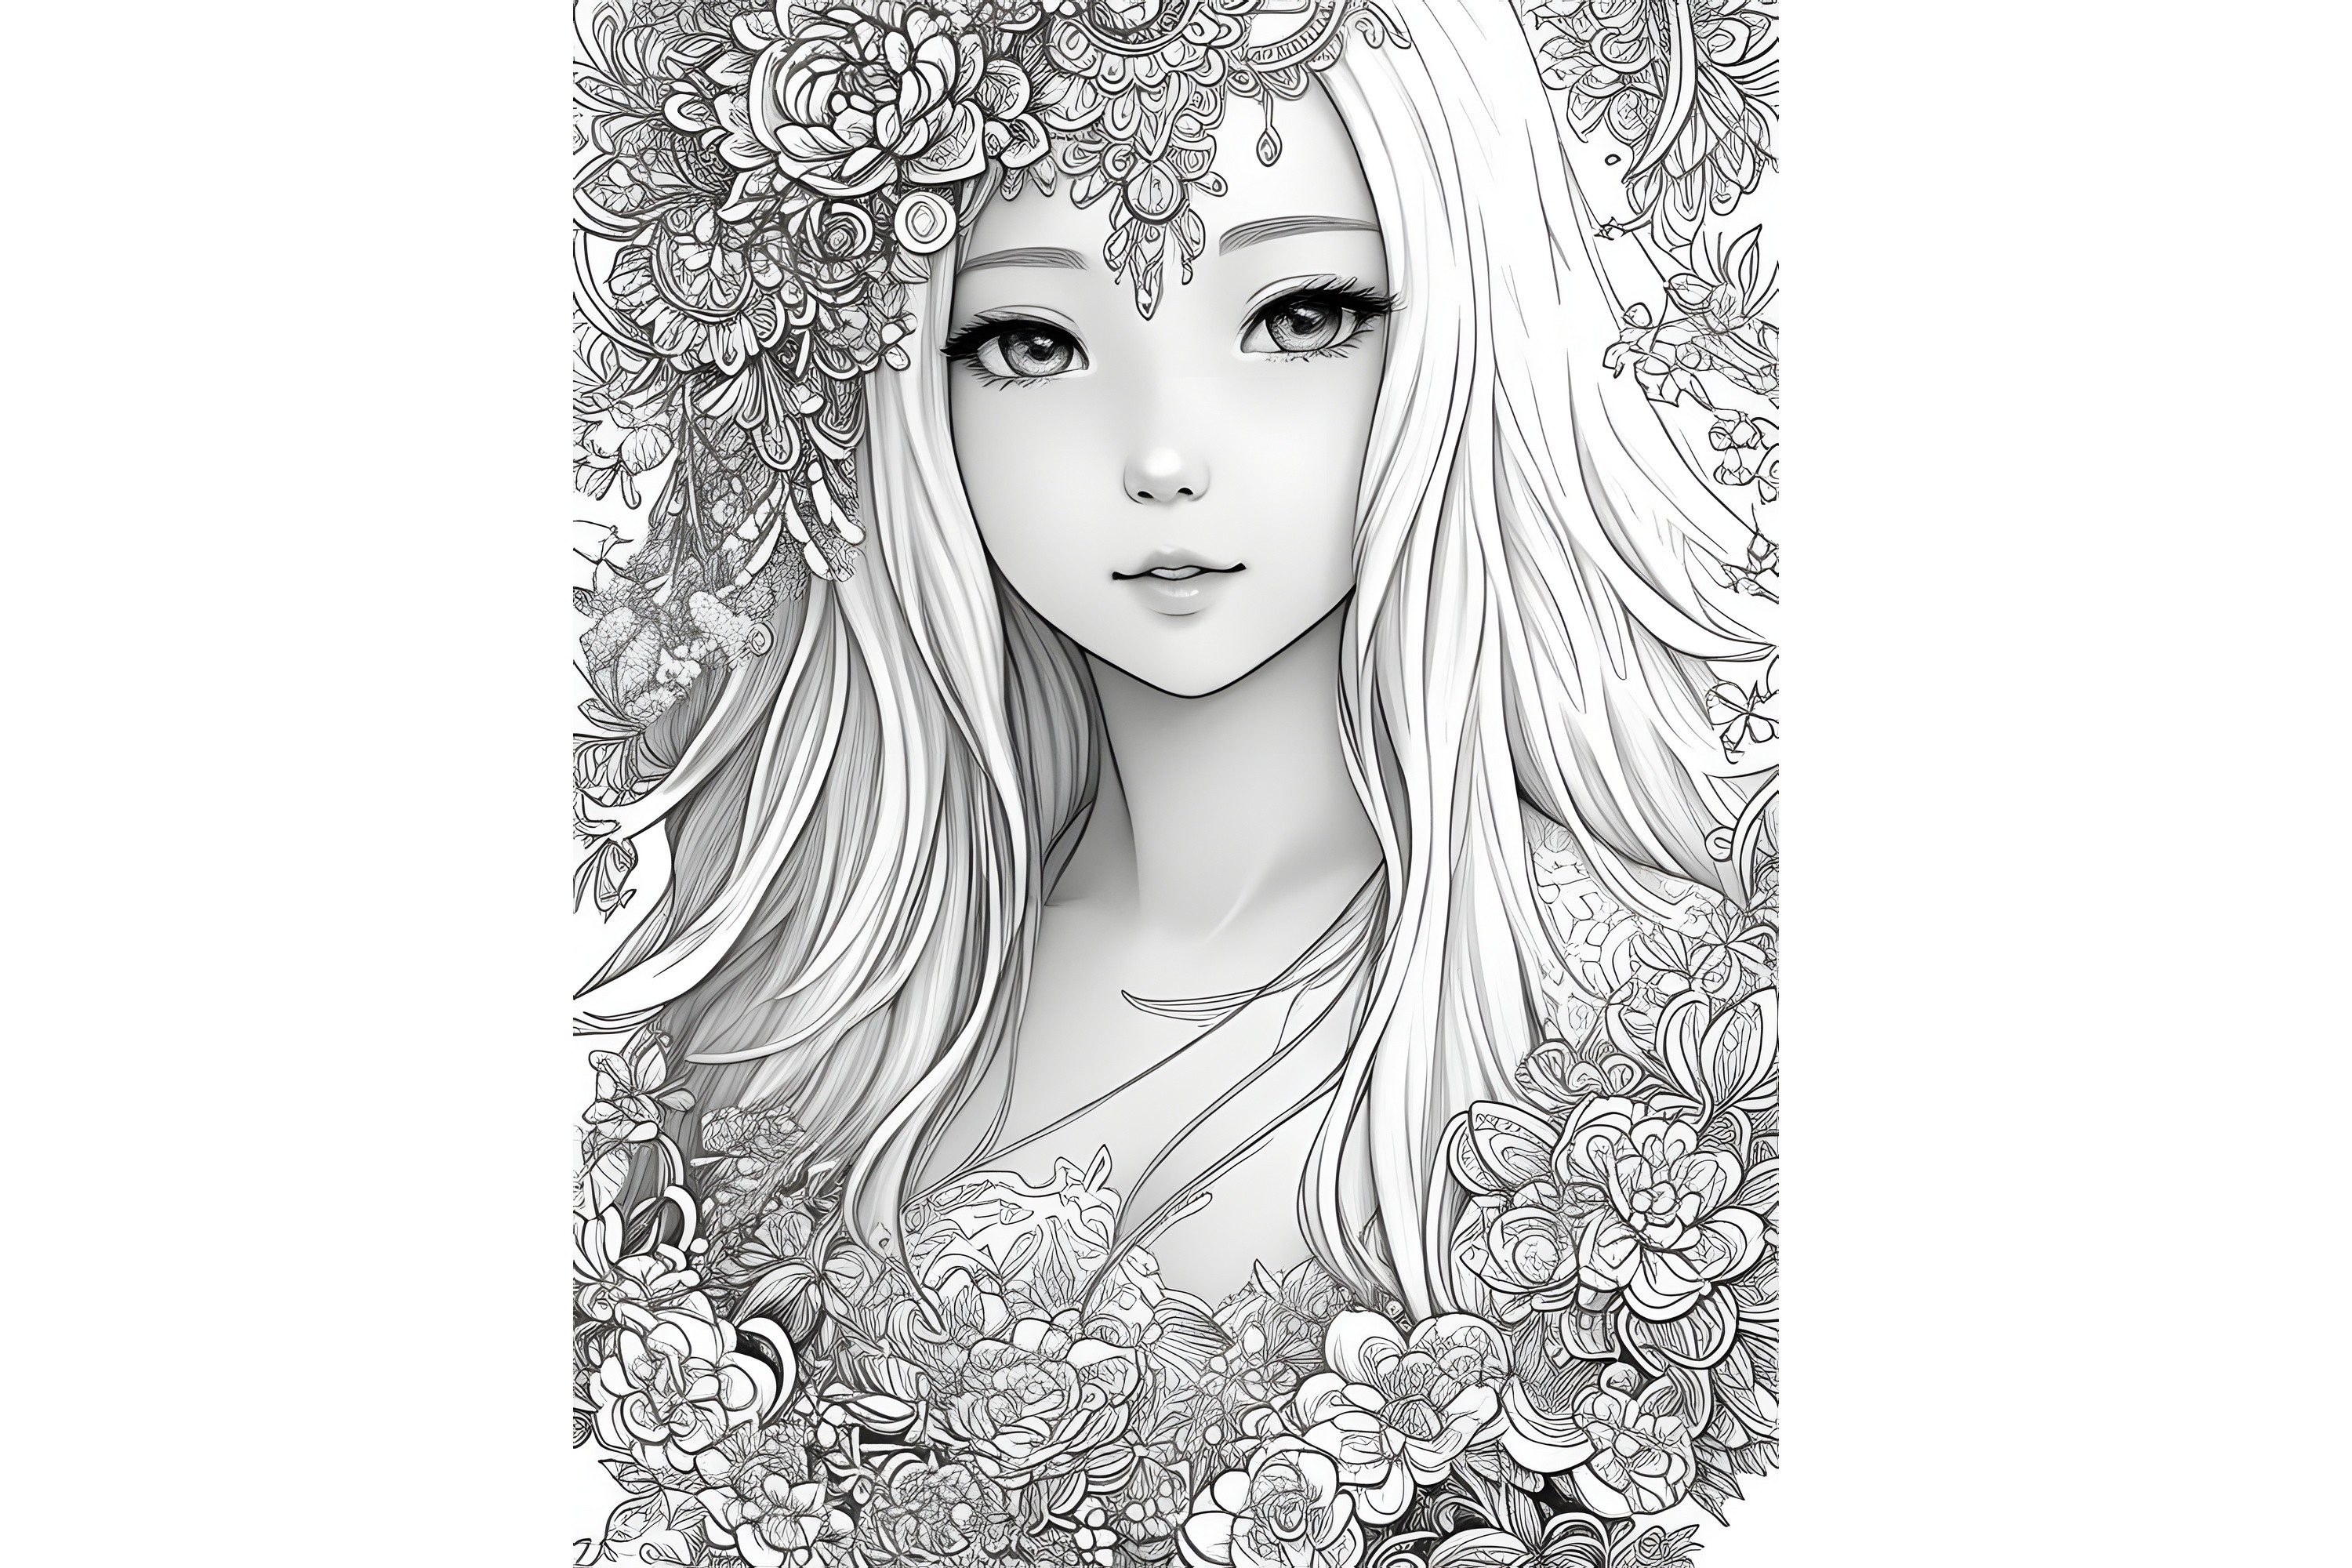 Female Coloring Page for Adults Graphic by Craftable · Creative Fabrica